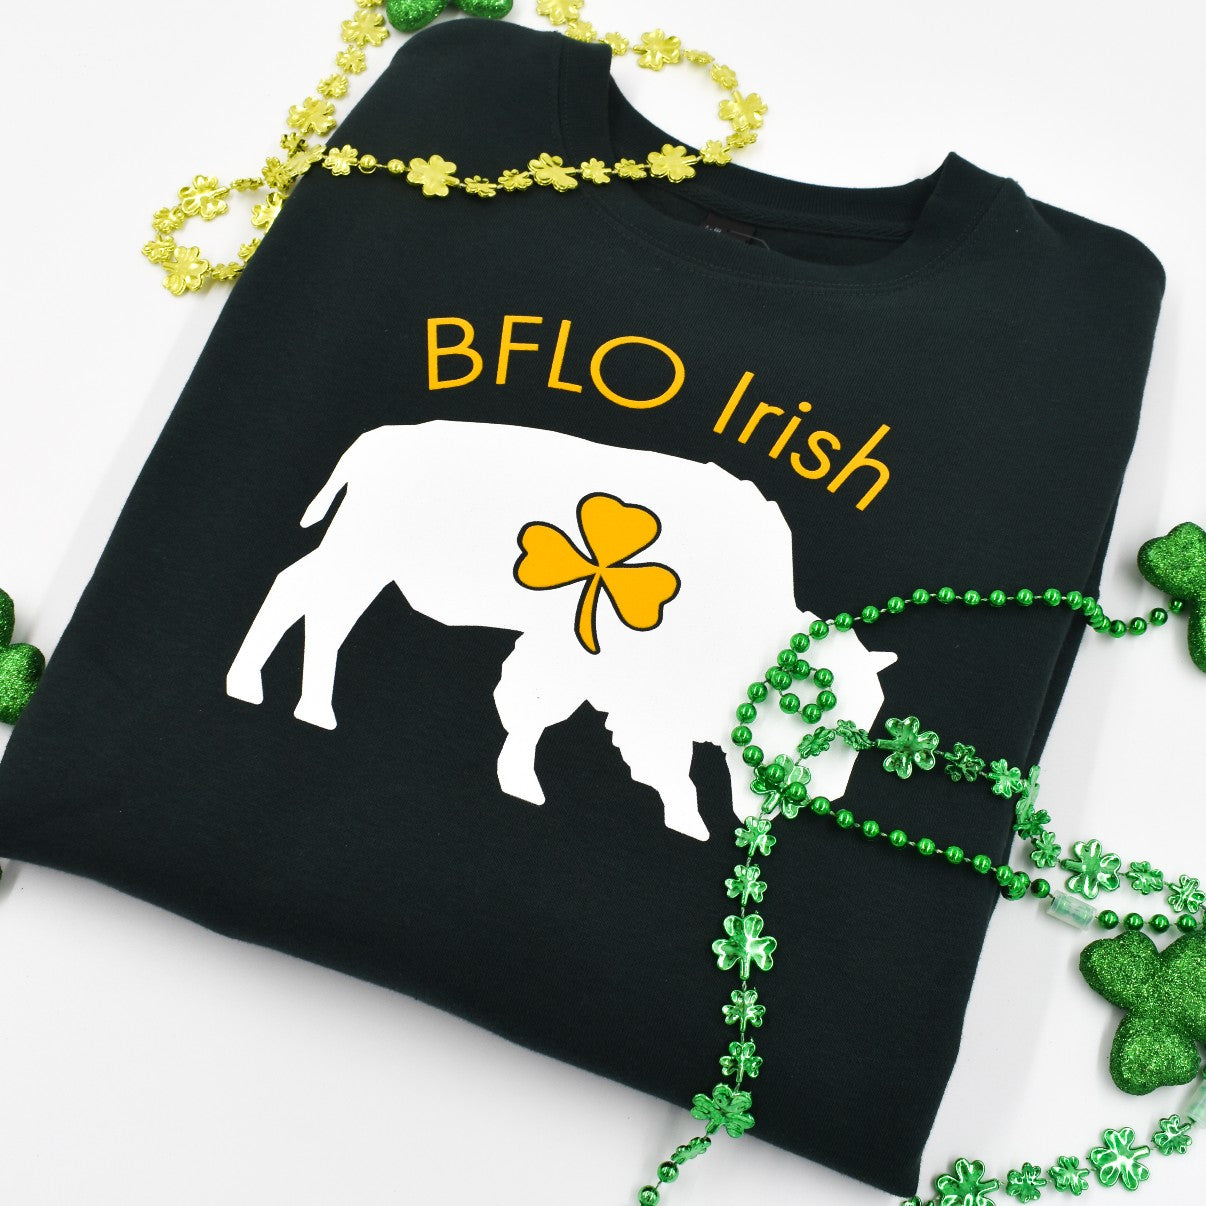 Buffalo BFLO Irish green crew neck with gold and green necklaces for St Patricks Day